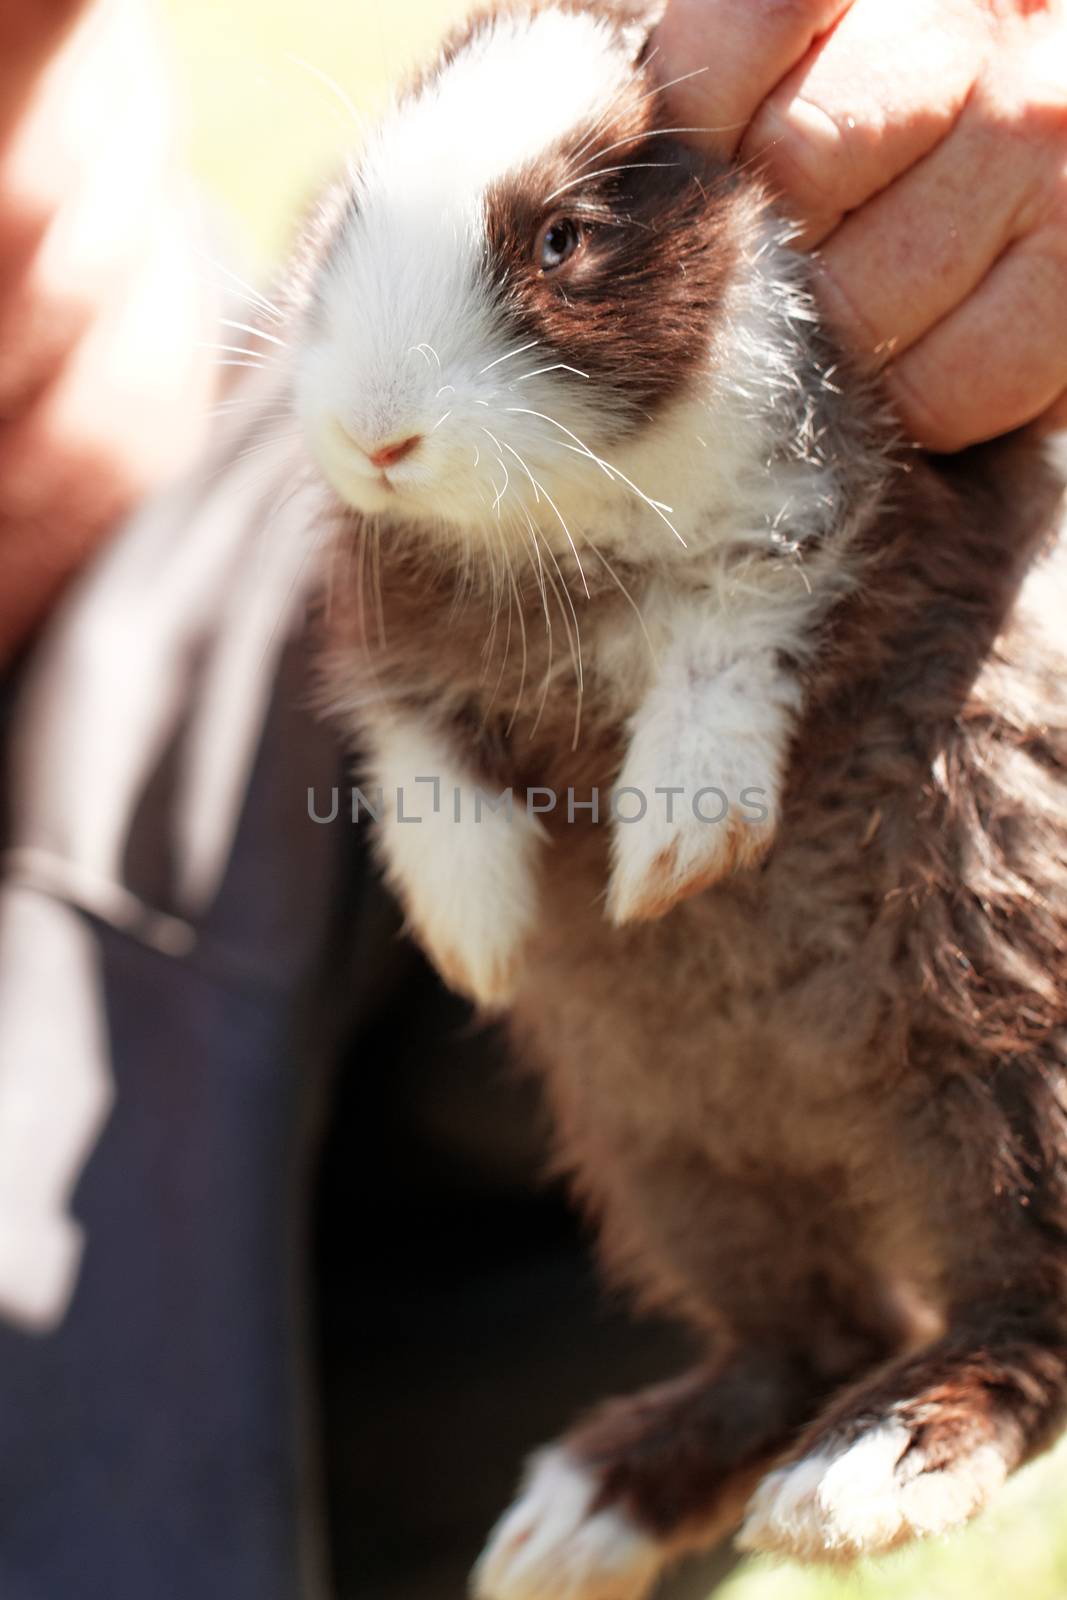 Farmer man holding in his hands a cute baby bunny rabbit